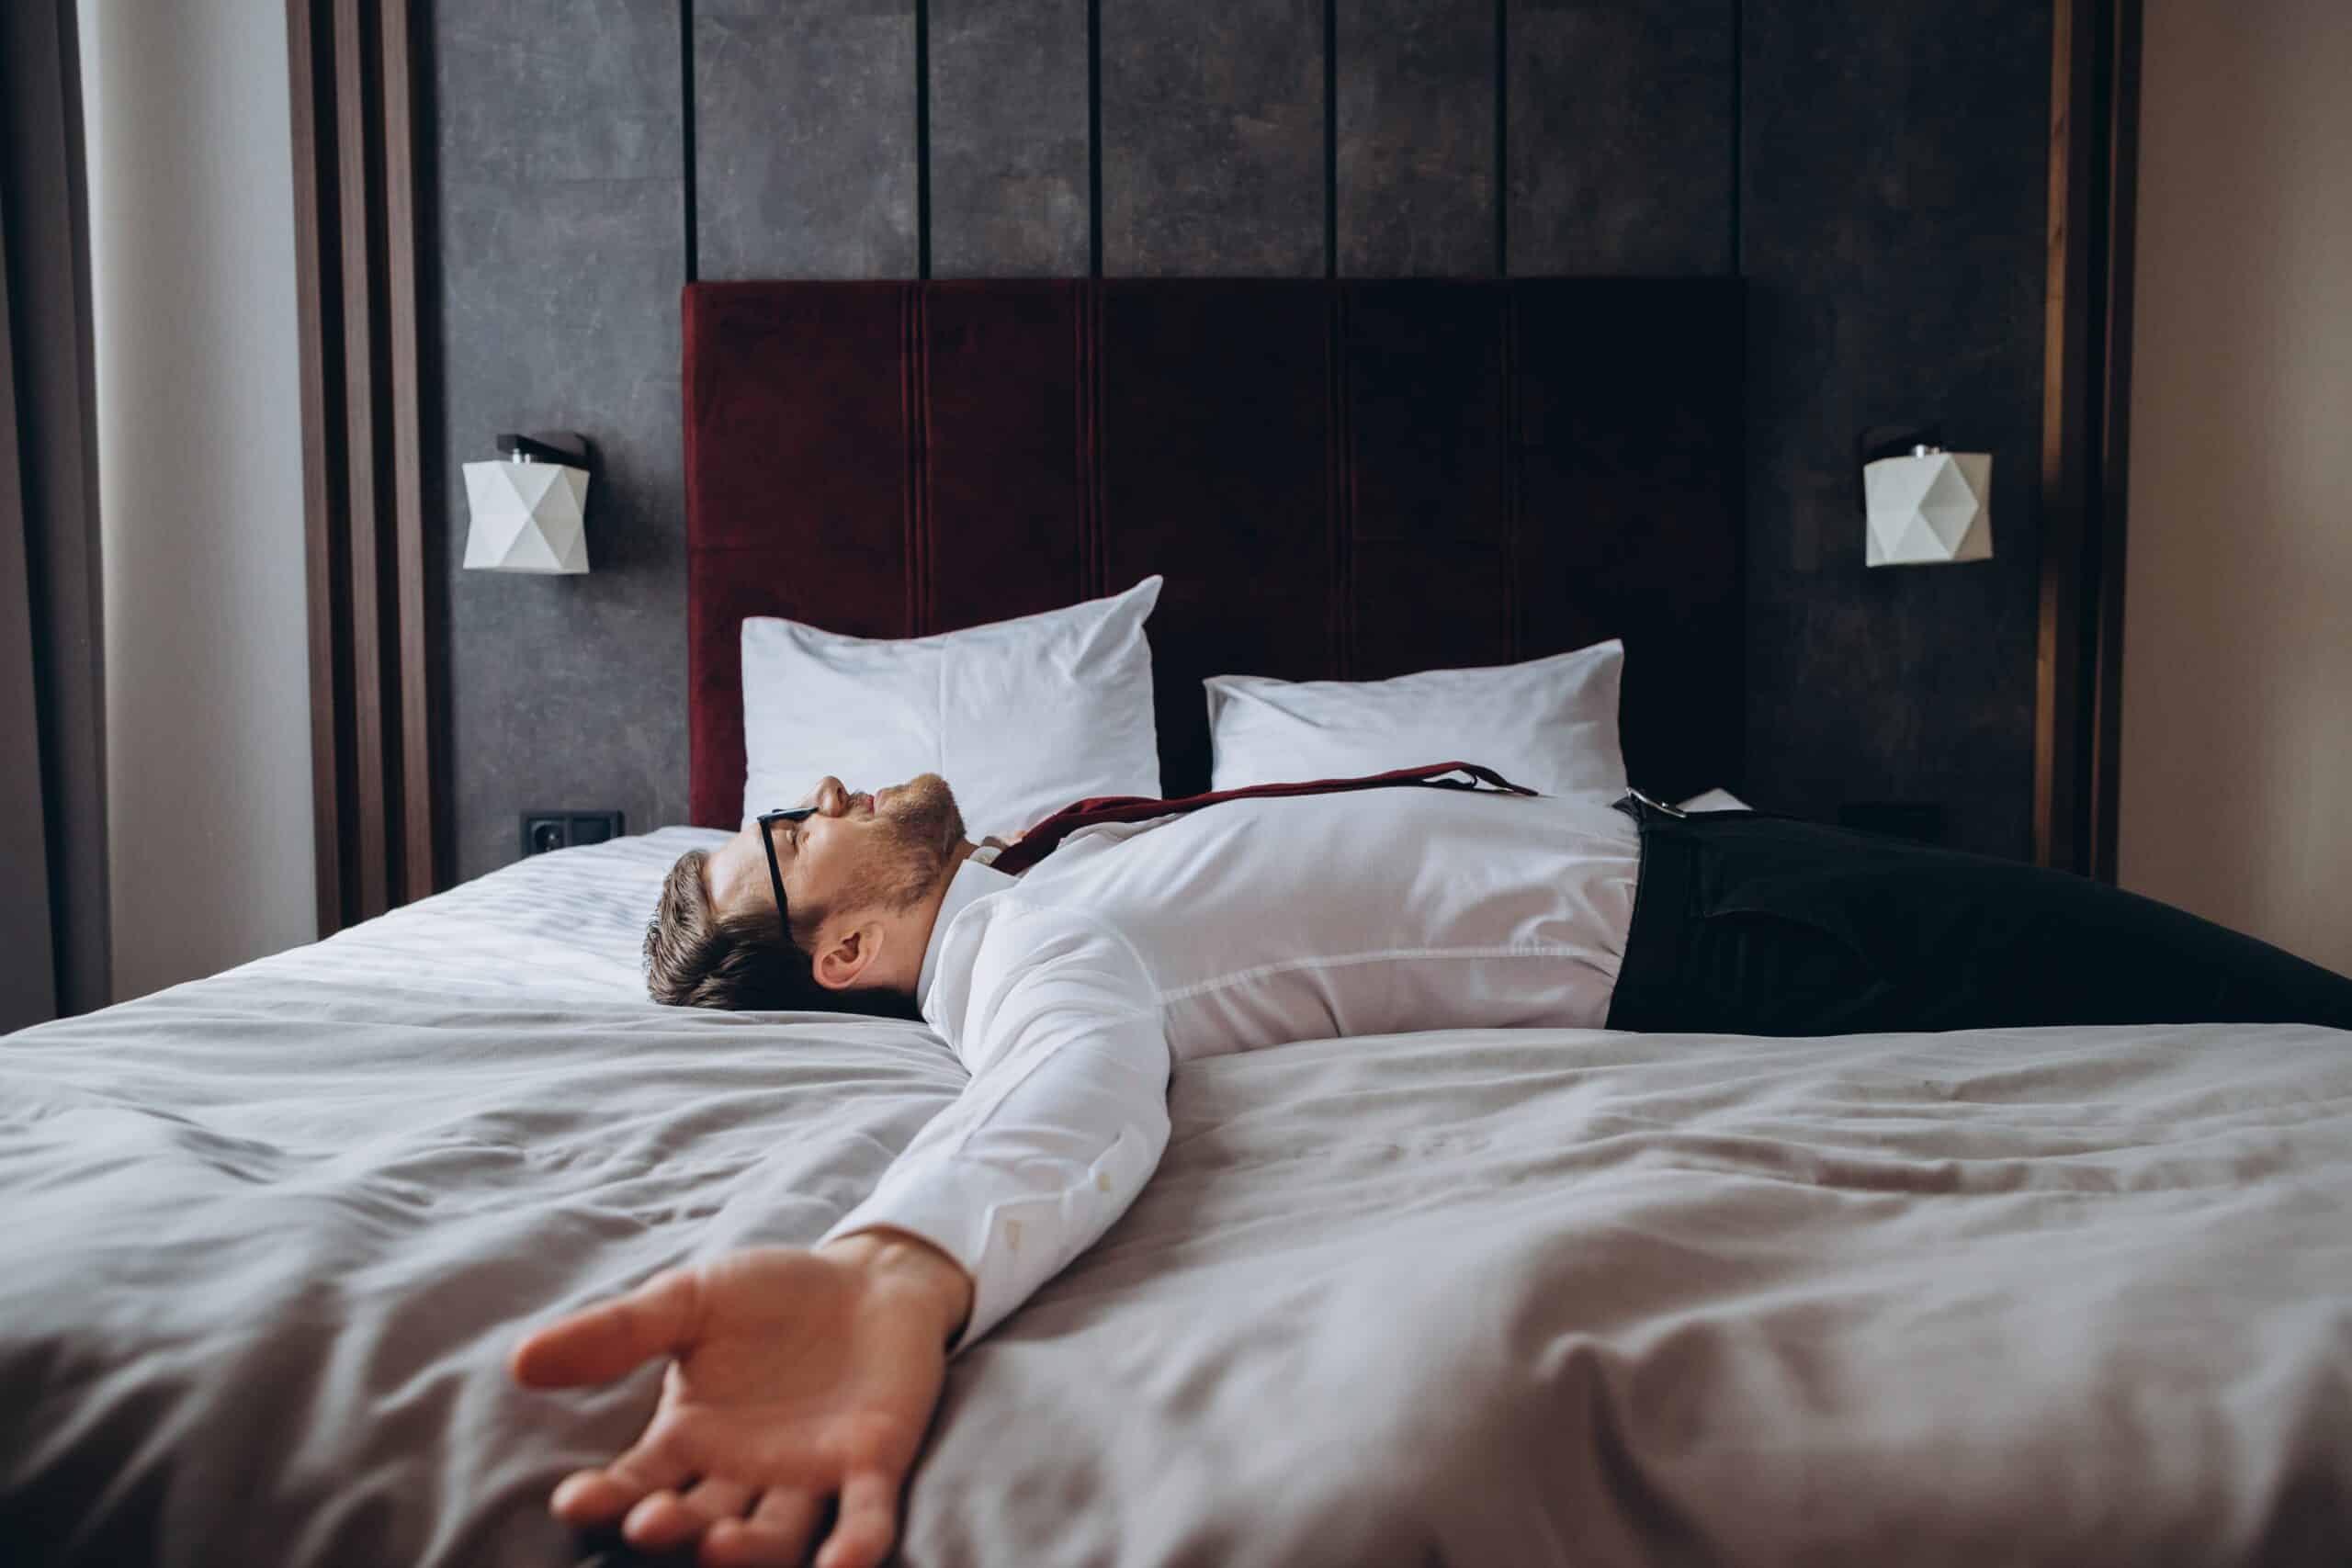 A man lying on a hotel bed